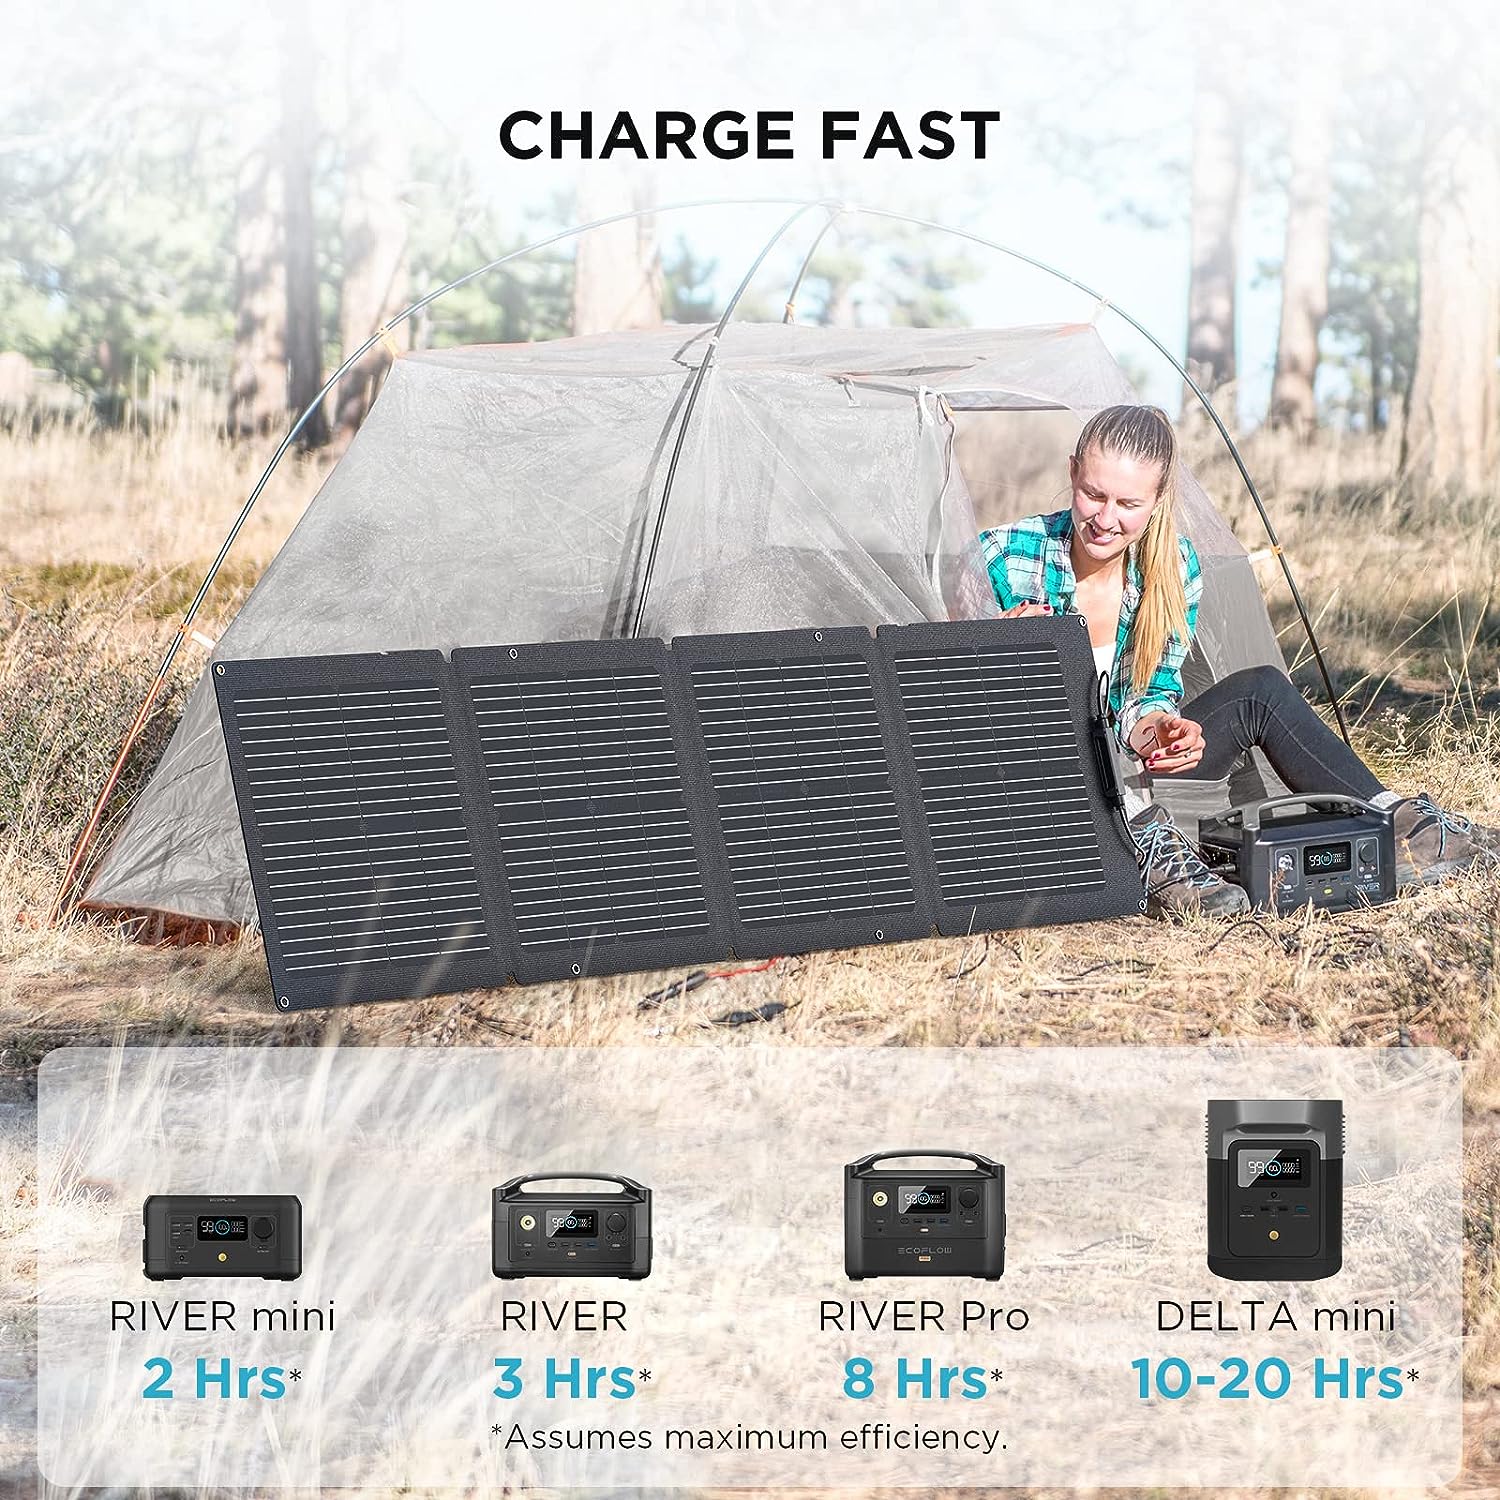 EF ECOFLOW 110W Portable Solar Panel, Foldable with Carry Case, High 23% Efficiency, IP68 Water & Dustproof Design for Camping, RVs, or Backyard Use